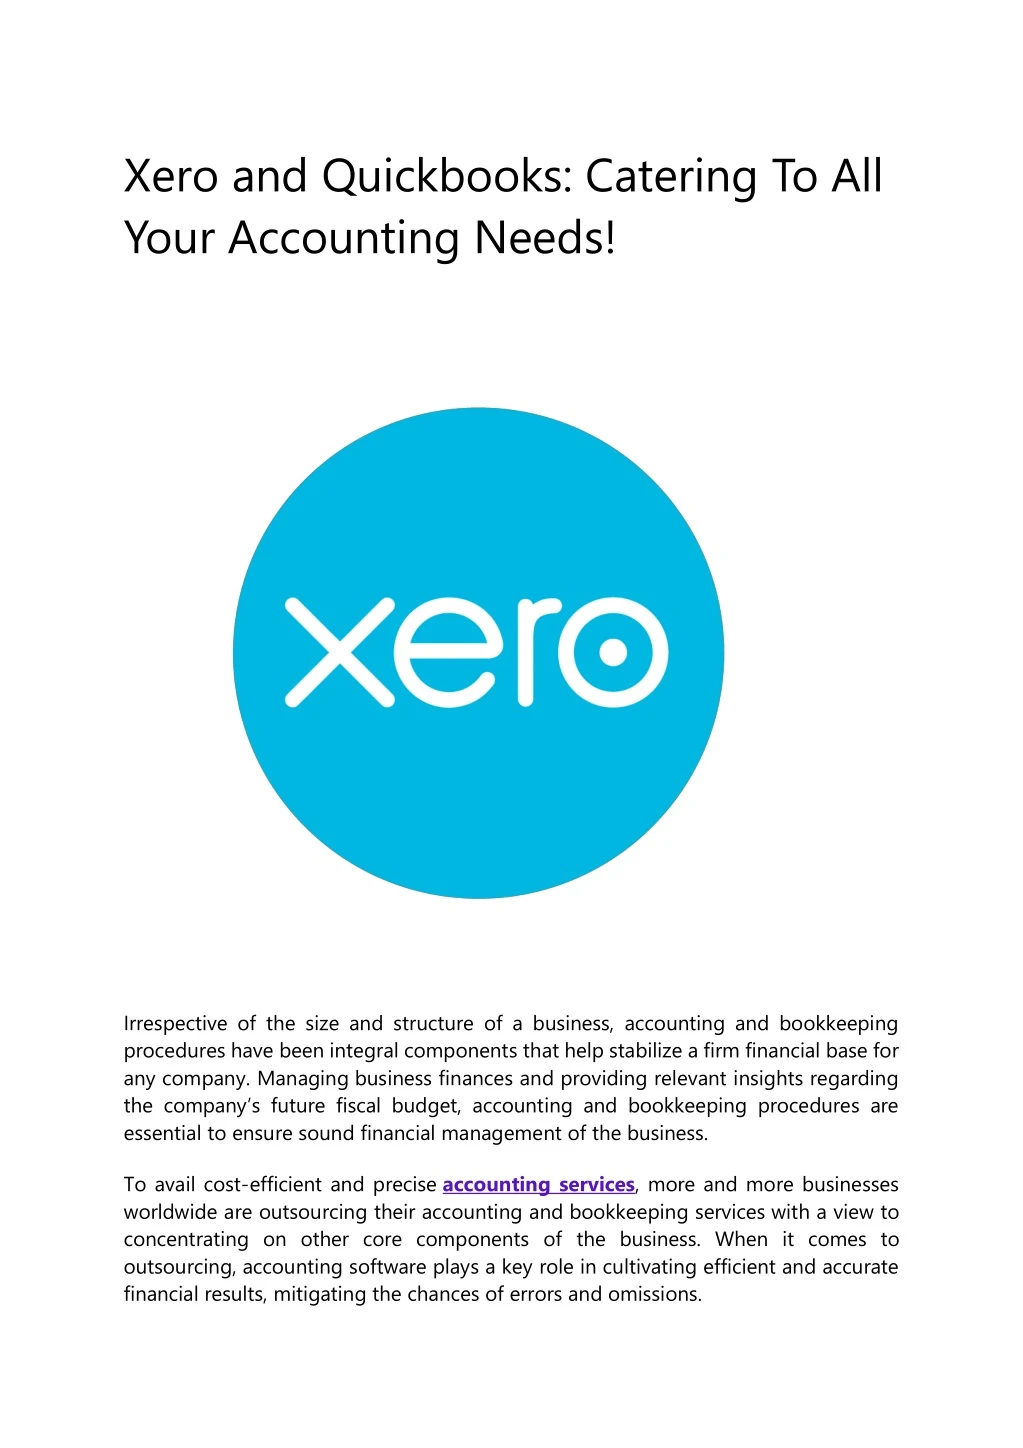 xero and quickbooks catering to all your